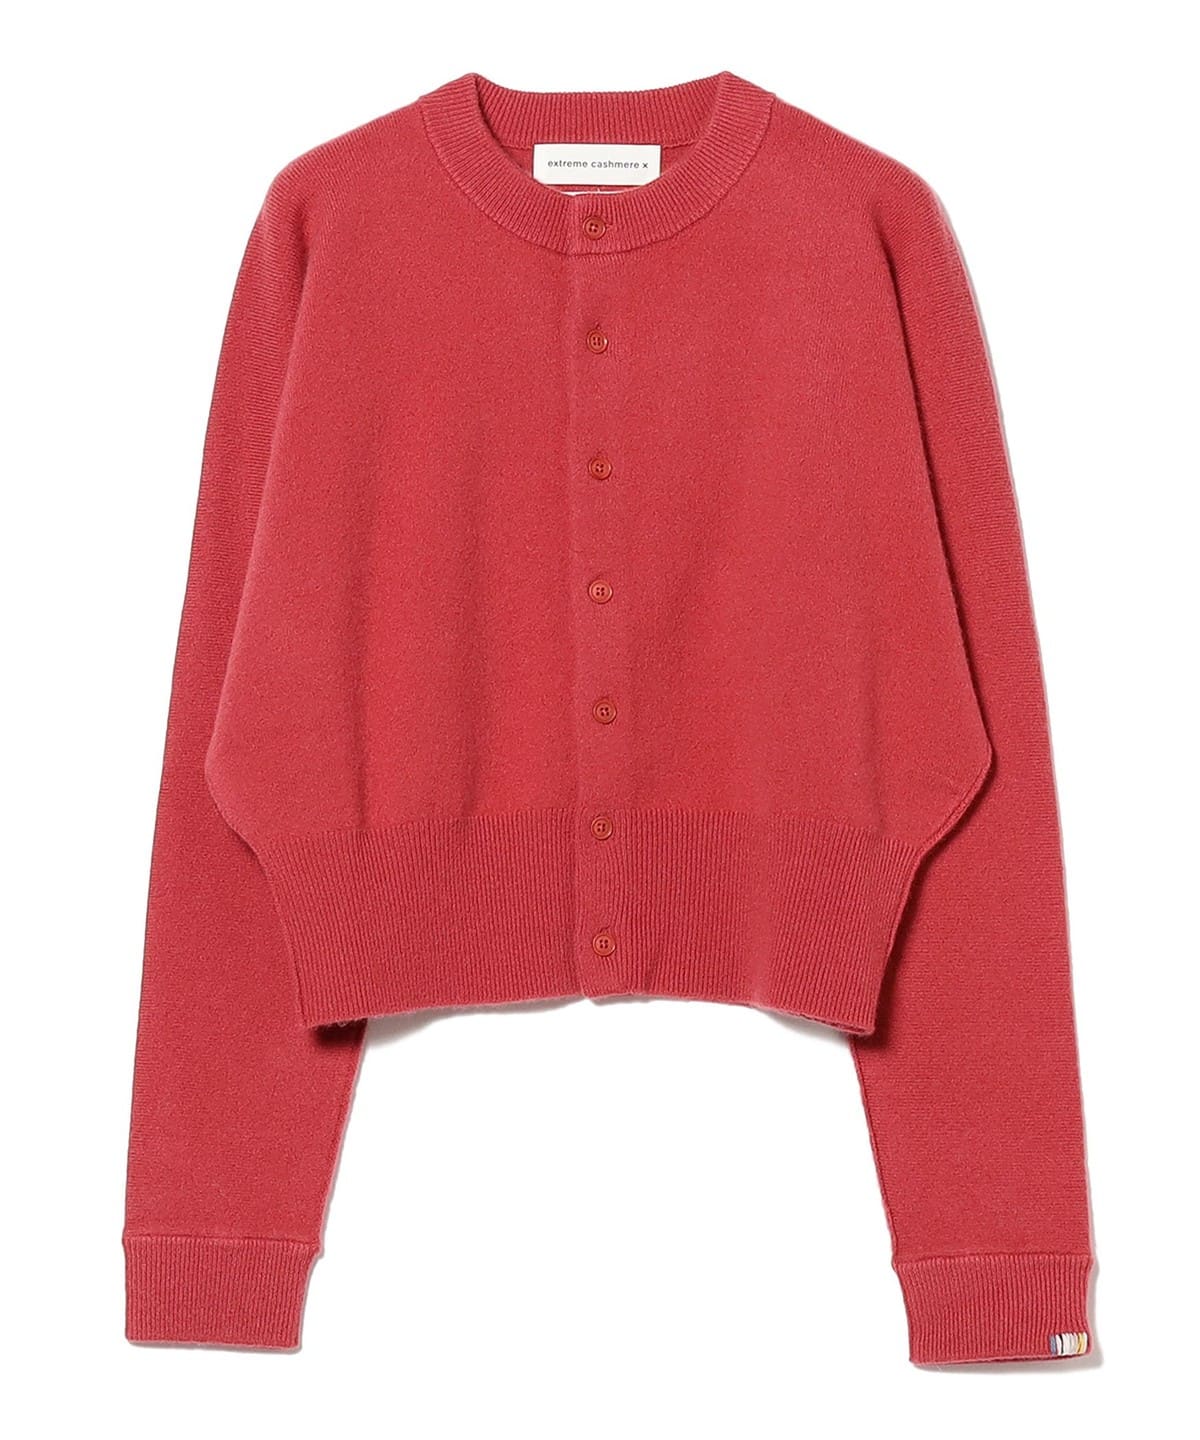 Demi-Luxe BEAMS（デミルクス ビームス）extreme cashmere / blouson ...